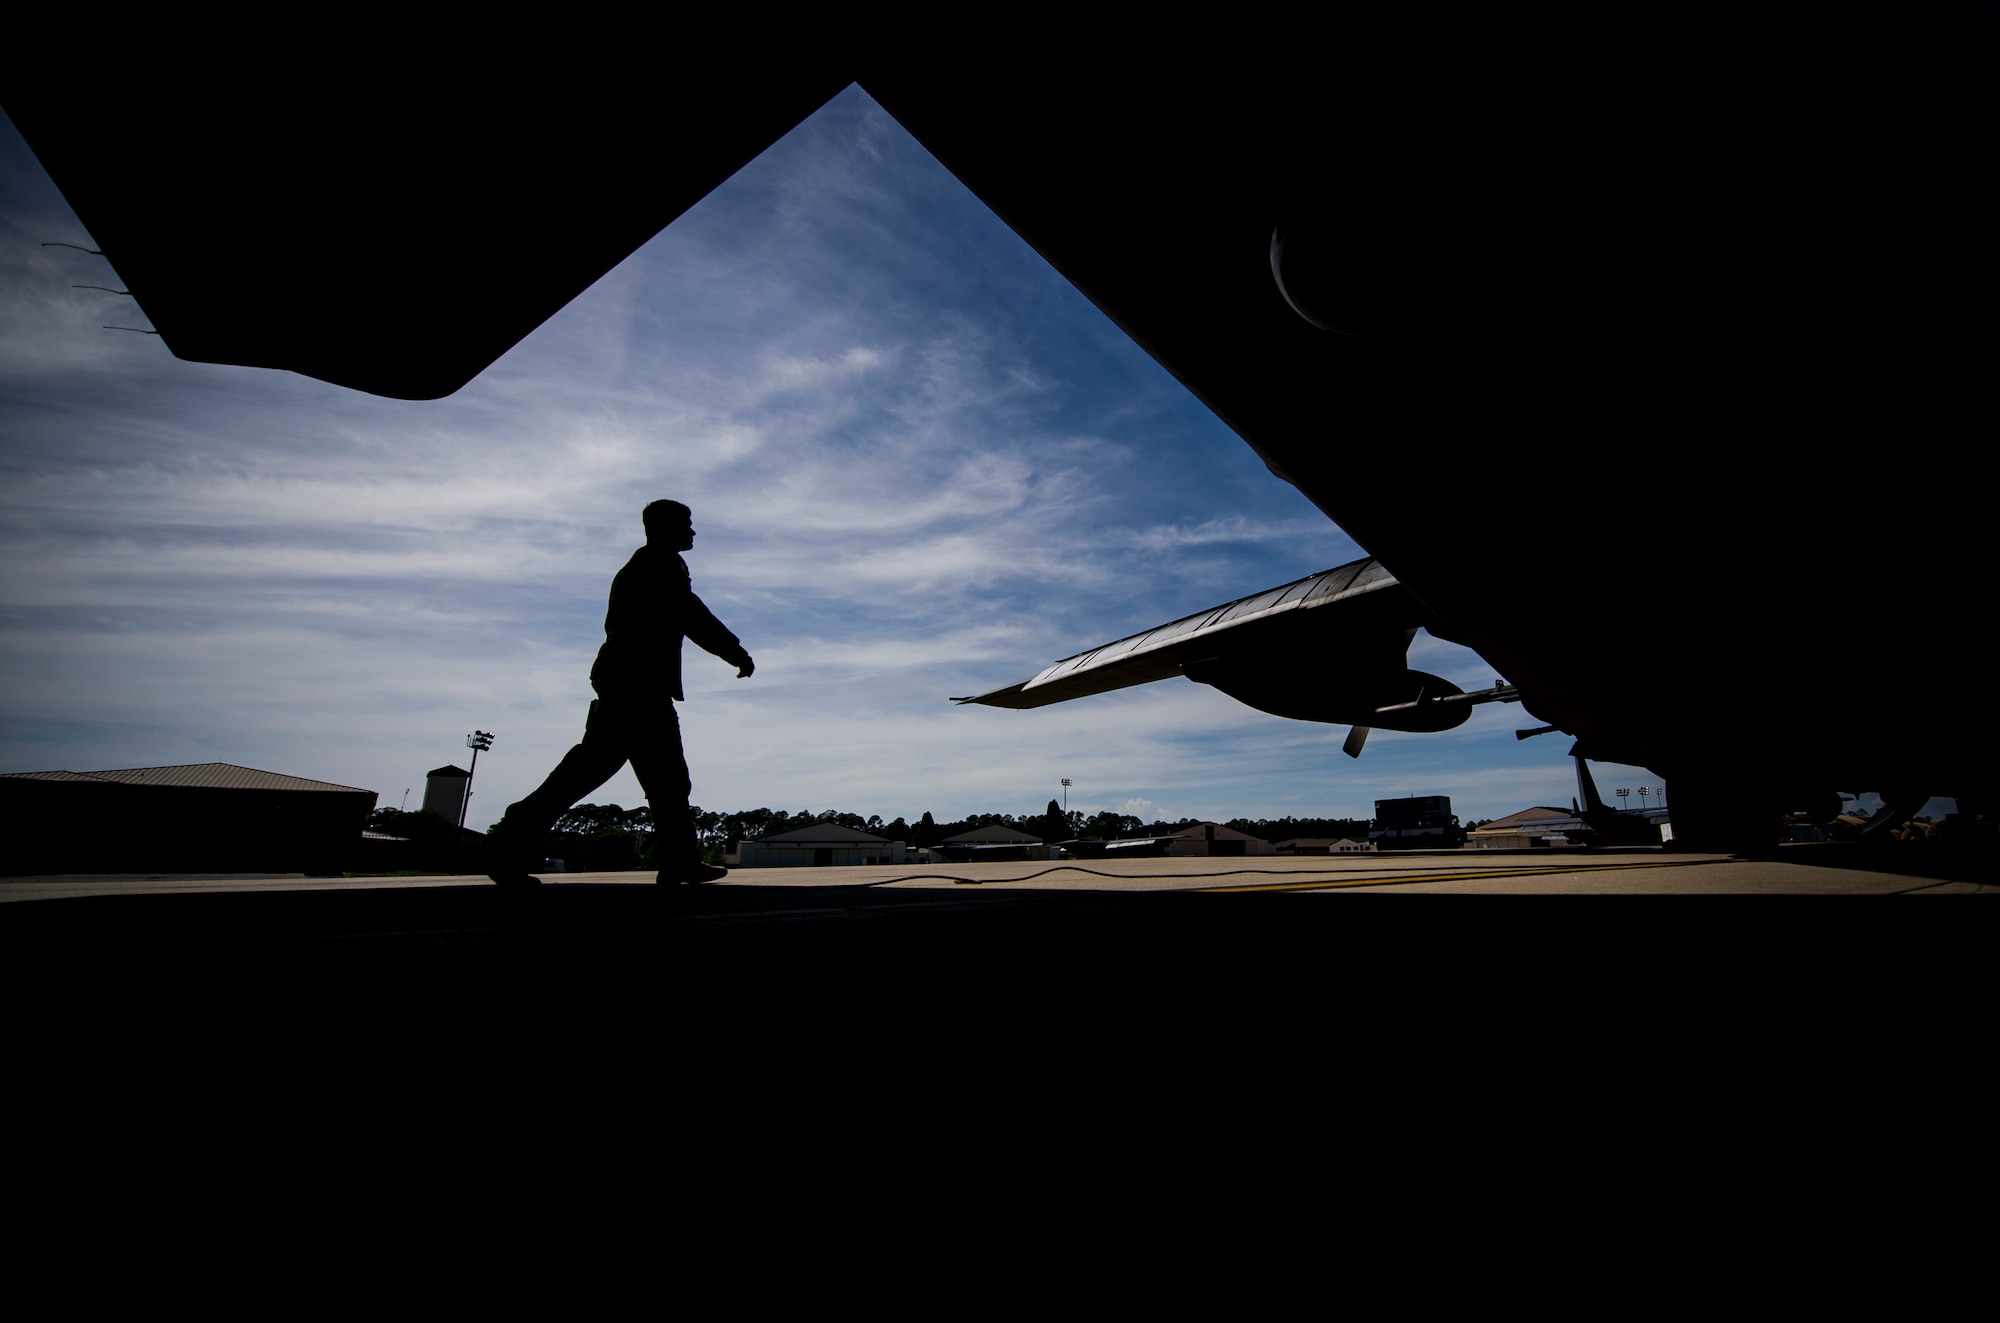 Staff Sgt. Alex Almarales, a special missions aviator with the 4th Special Operations Squadron, conducts preflight inspections of an AC-130U Spooky gunship at Hurlburt Field, Fla., April 17, 2017. The AC-130U gunship’s primary missions are close air support, air interdiction and armed reconnaissance. (U.S. Air Force photo by Airman 1st Class Joseph Pick)